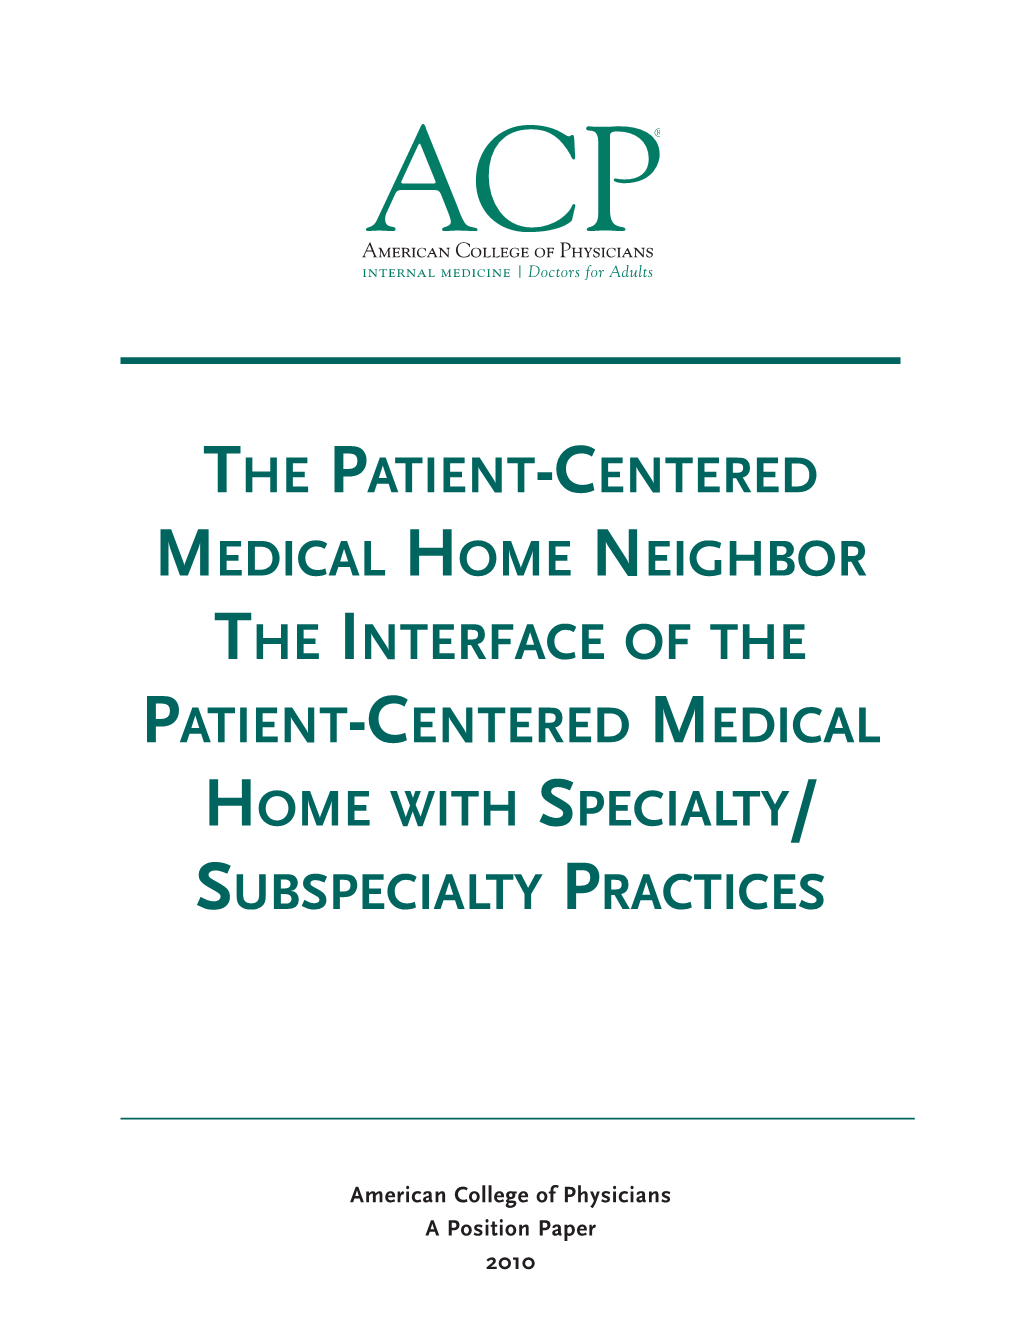 The Patient-Centered Medical Home Neighbor the Interface of the Patient-Centered Medical Home with Specialty/ Subspecialty Practices